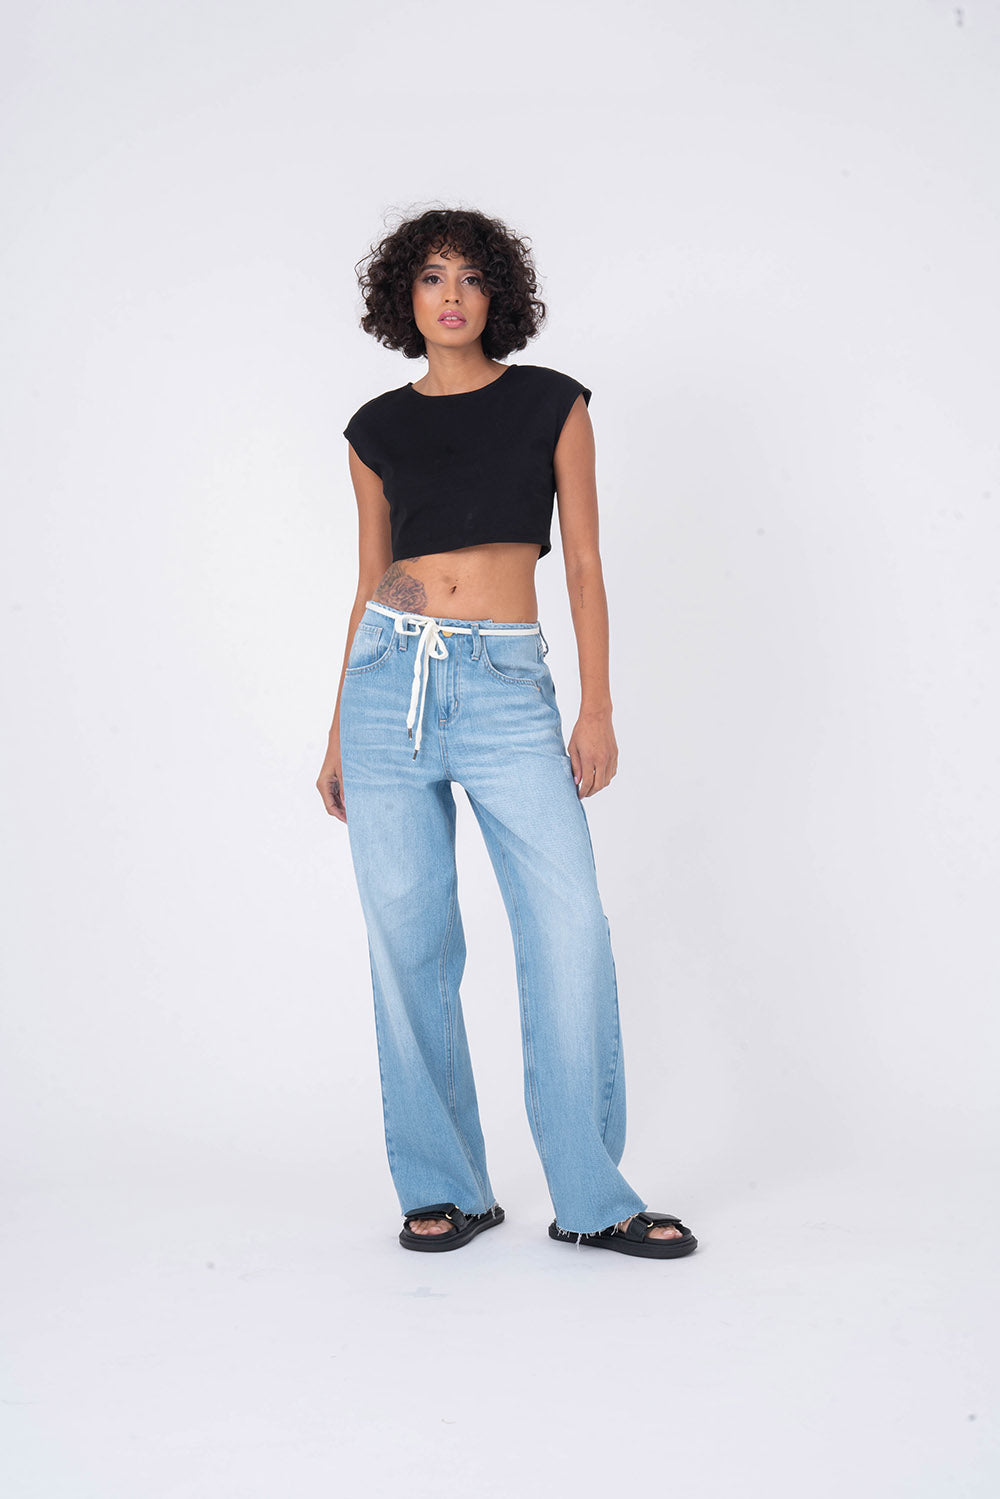 Sundae Jeans-Daze-Denim-Vixen Collection, Day Spa and Women's Boutique Located in Seattle, Washington